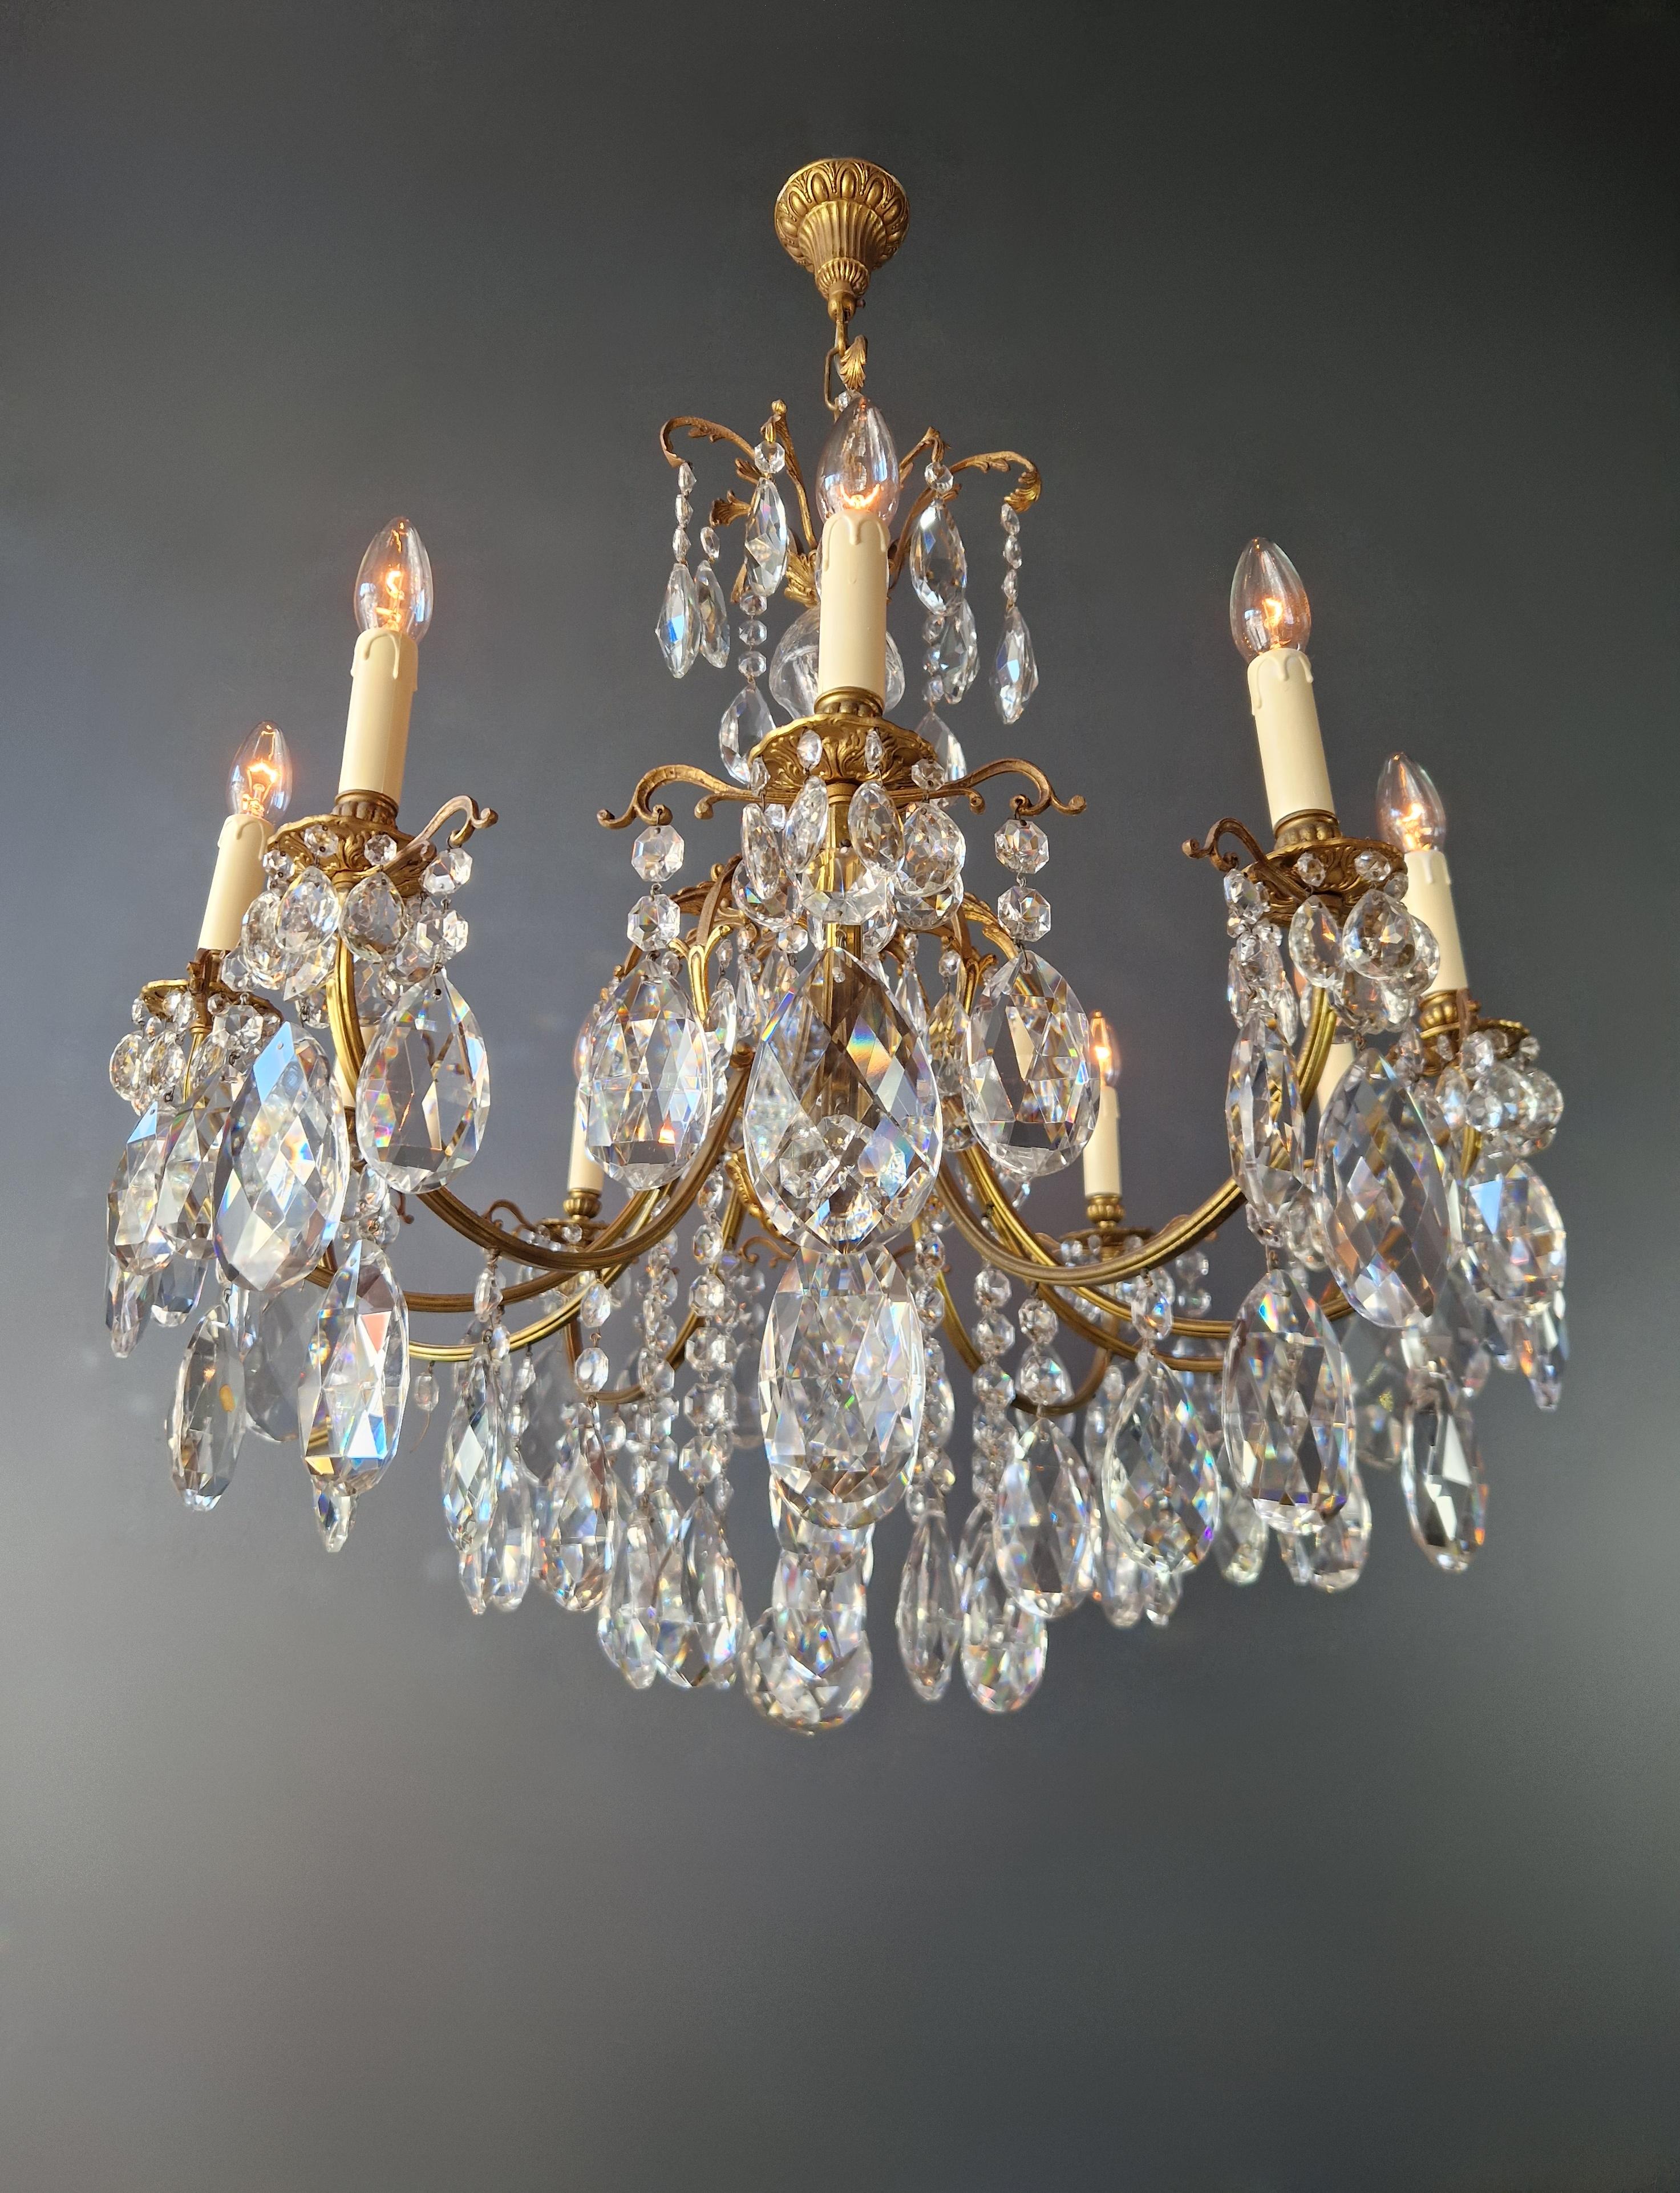 Mid-20th Century Art Nouveau Style Brass Crystal Chandelier Gold Foliage  For Sale